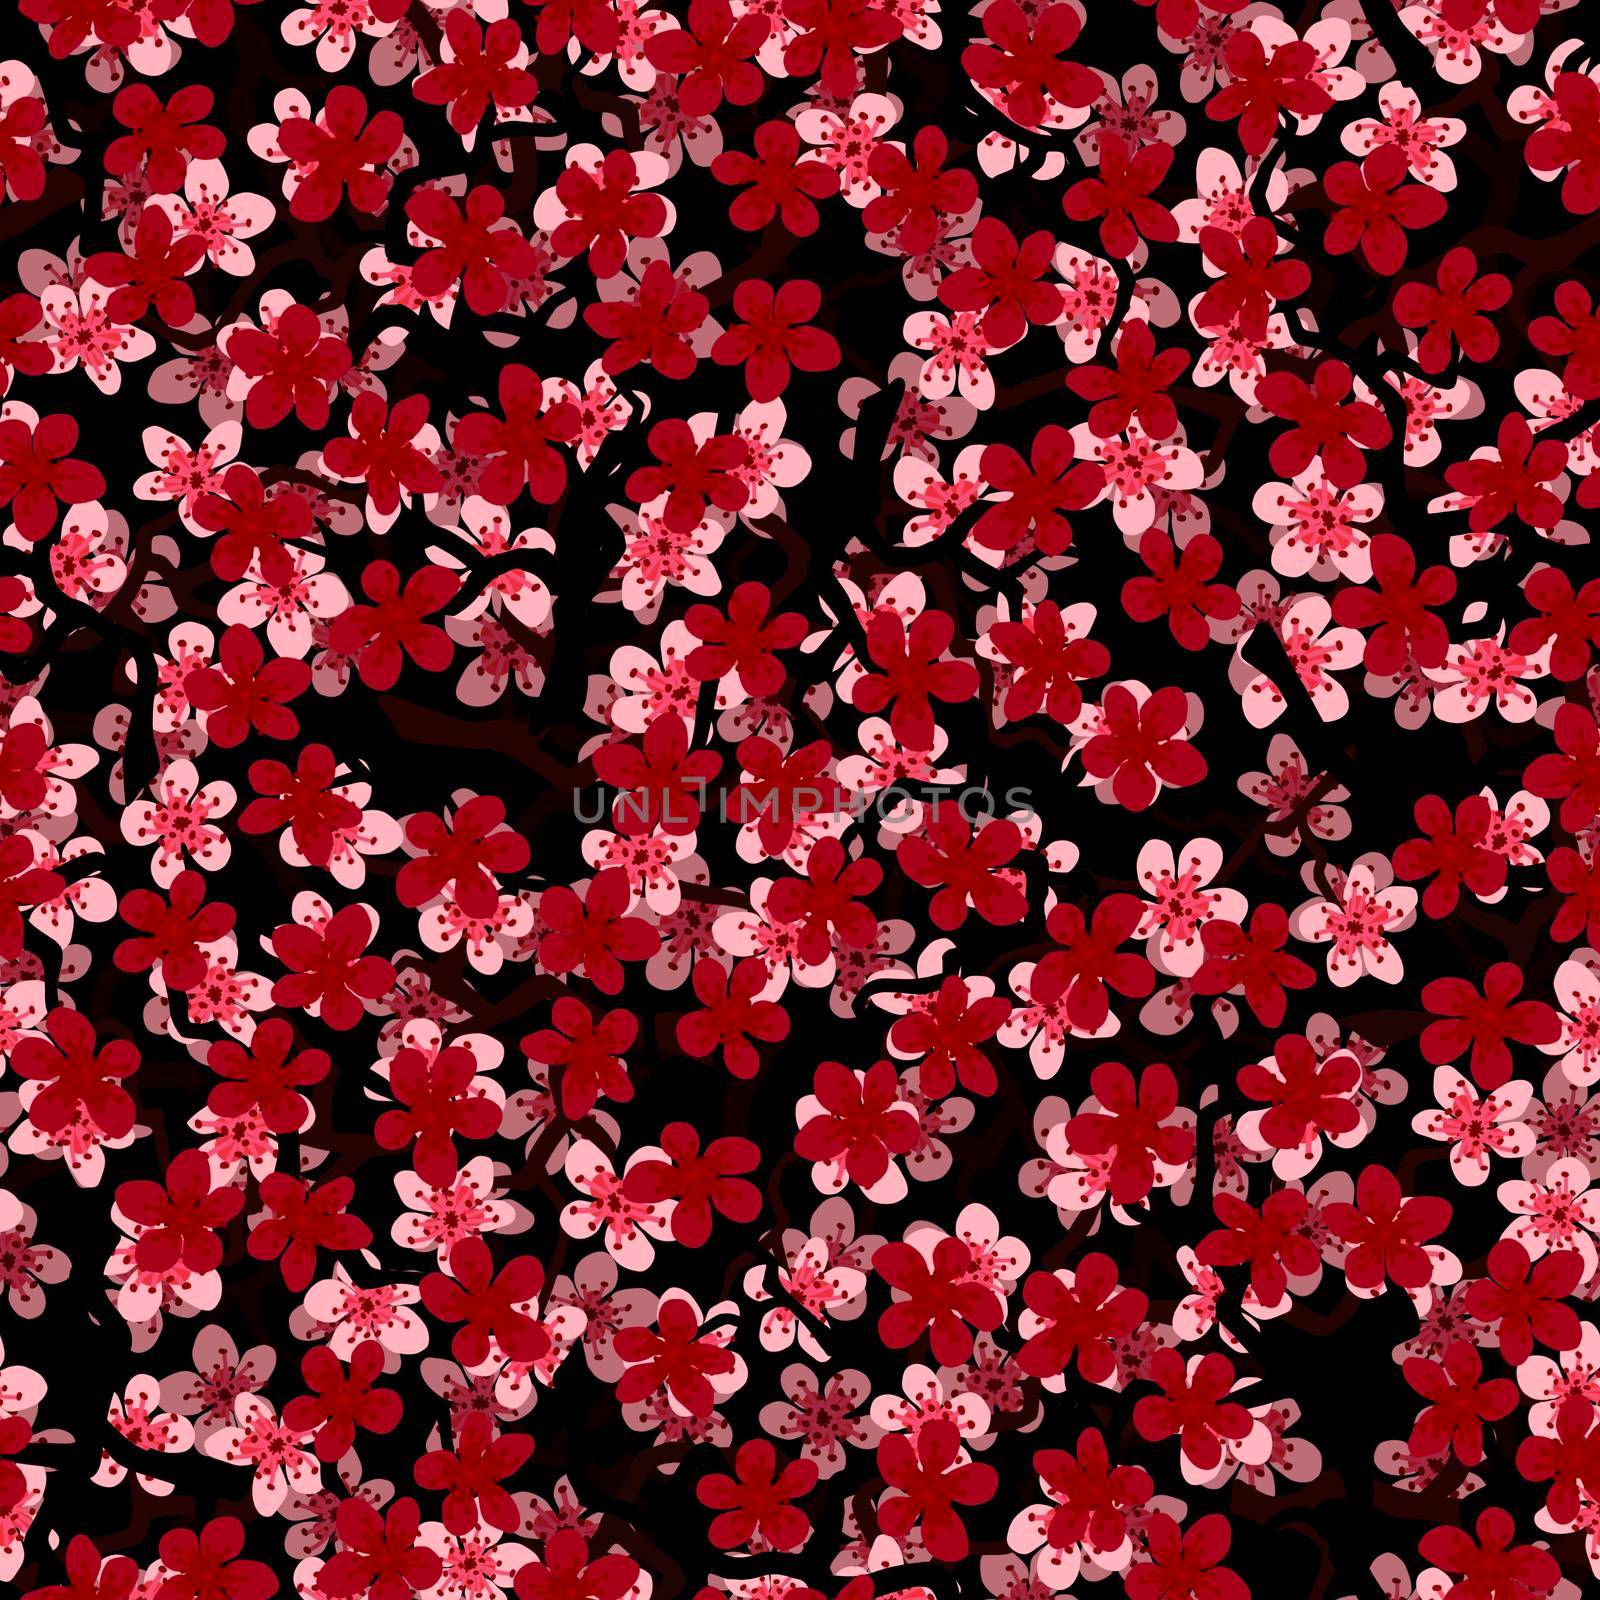 Seamless pattern with blossoming Japanese cherry sakura branches for fabric,packaging,wallpaper,textile,design, invitations,print,gift wrap,manufacturing.Pink and red flowers on black background by Angelsmoon